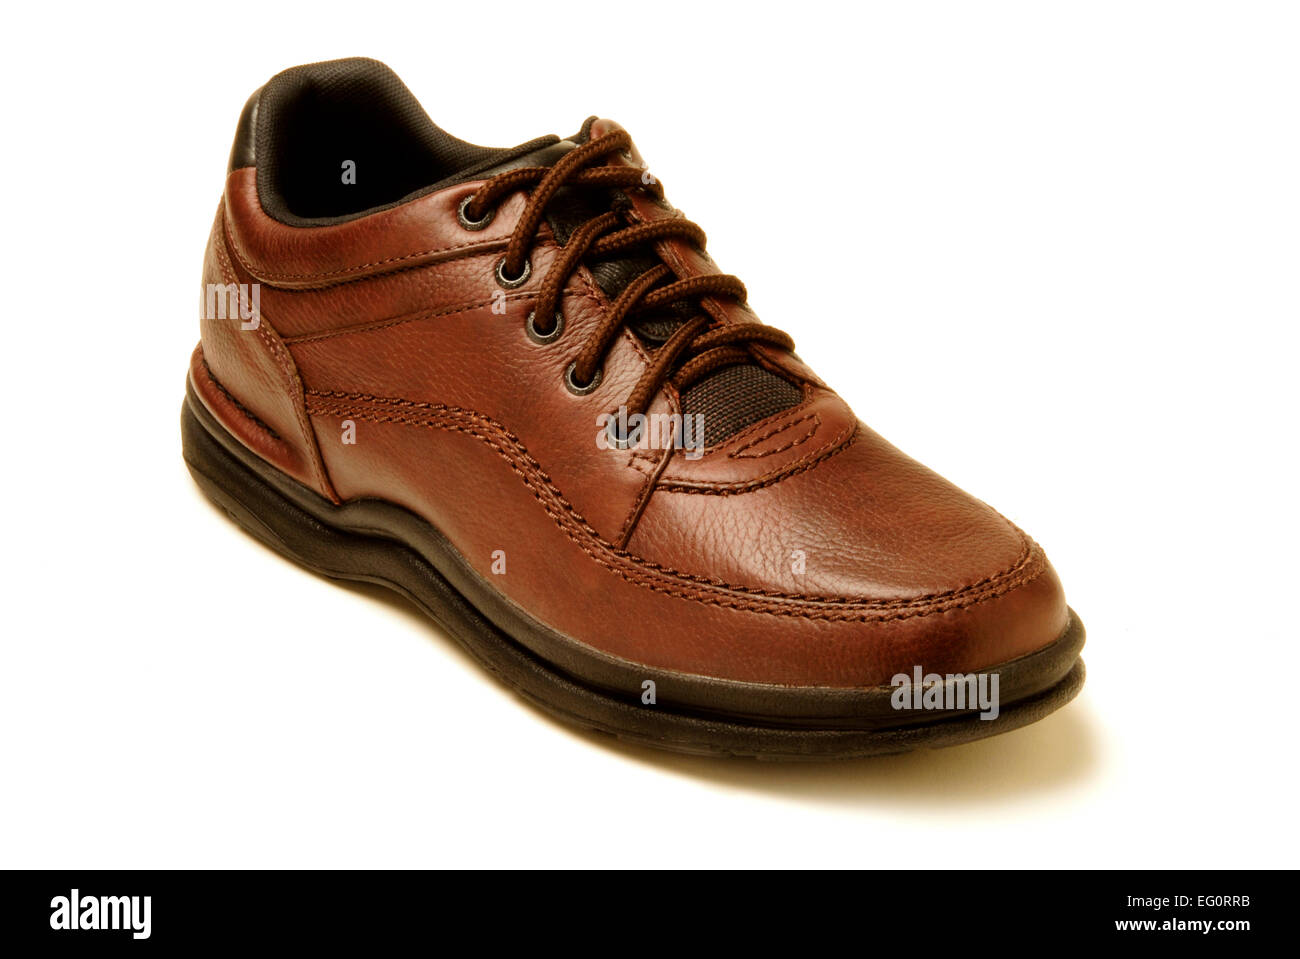 Single brown shoe isolated against white Stock Photo